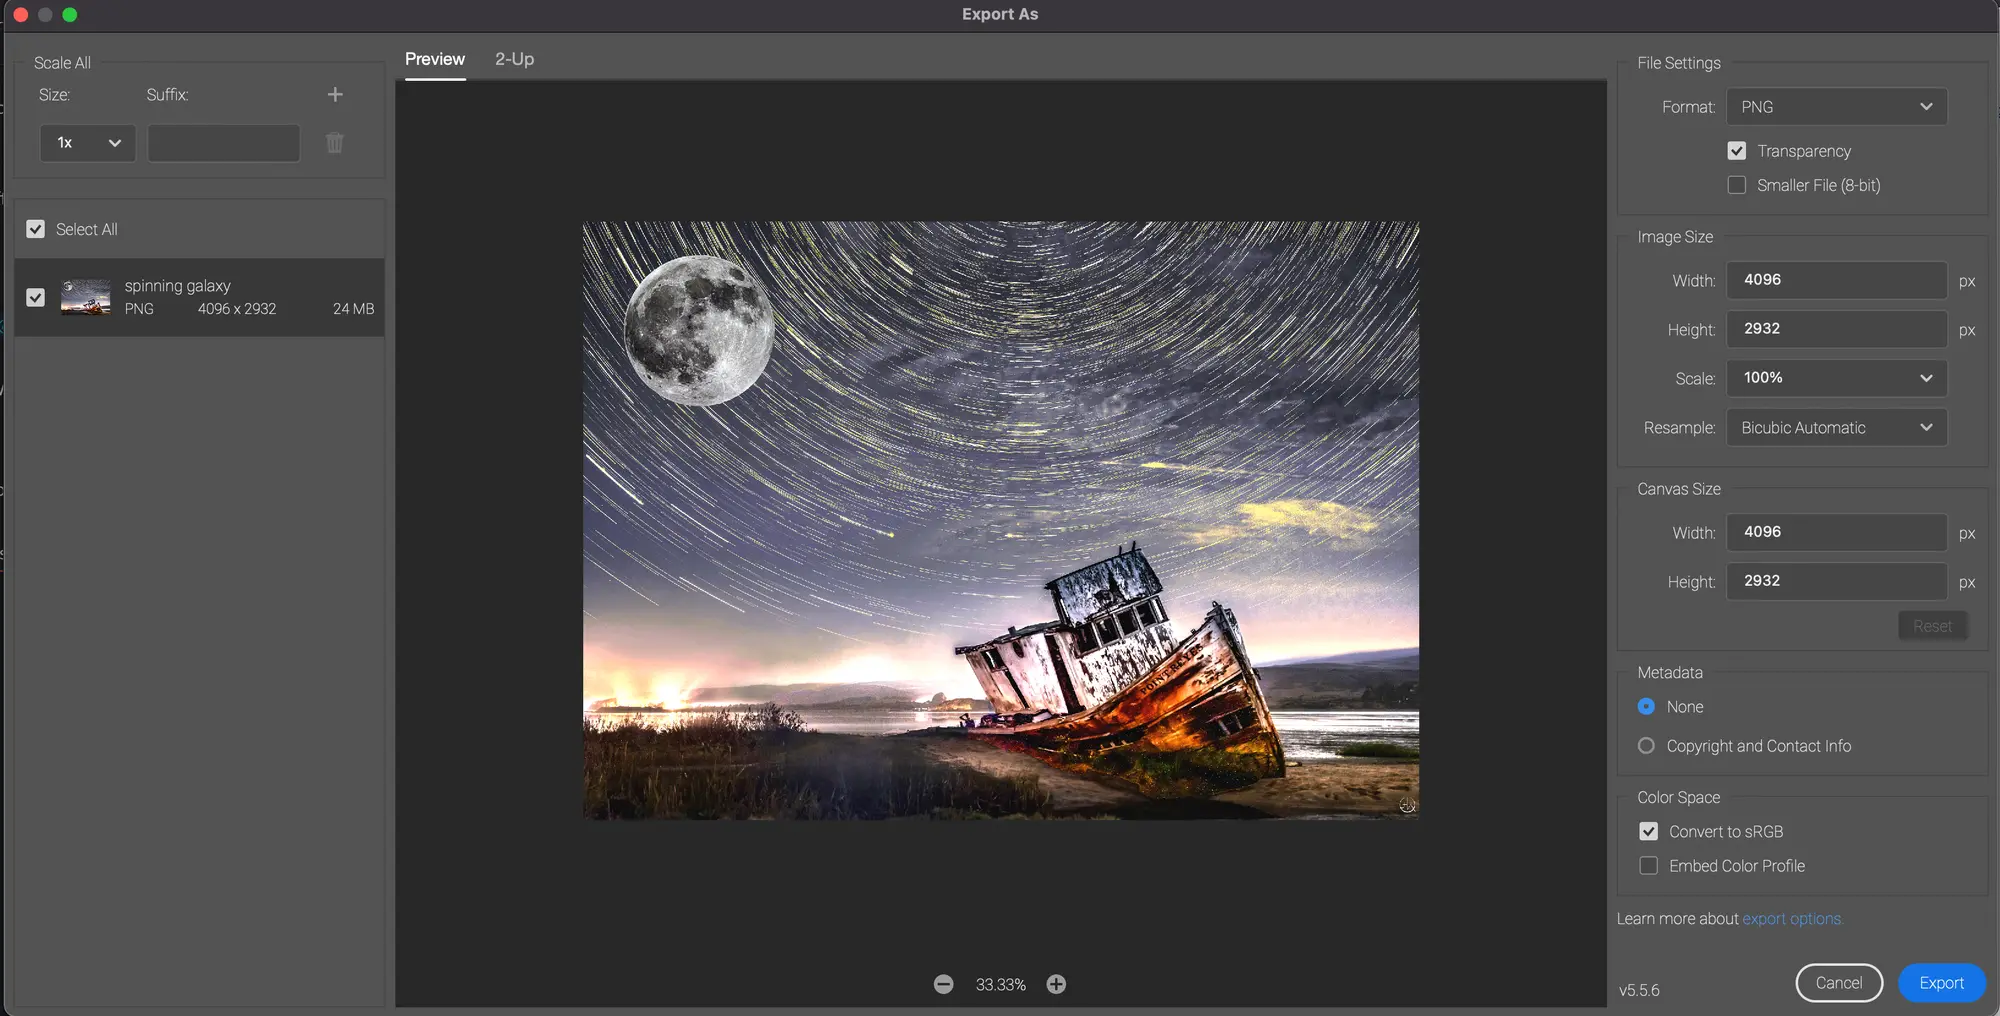 Screenshot of Photoshop's improved export as feature. 